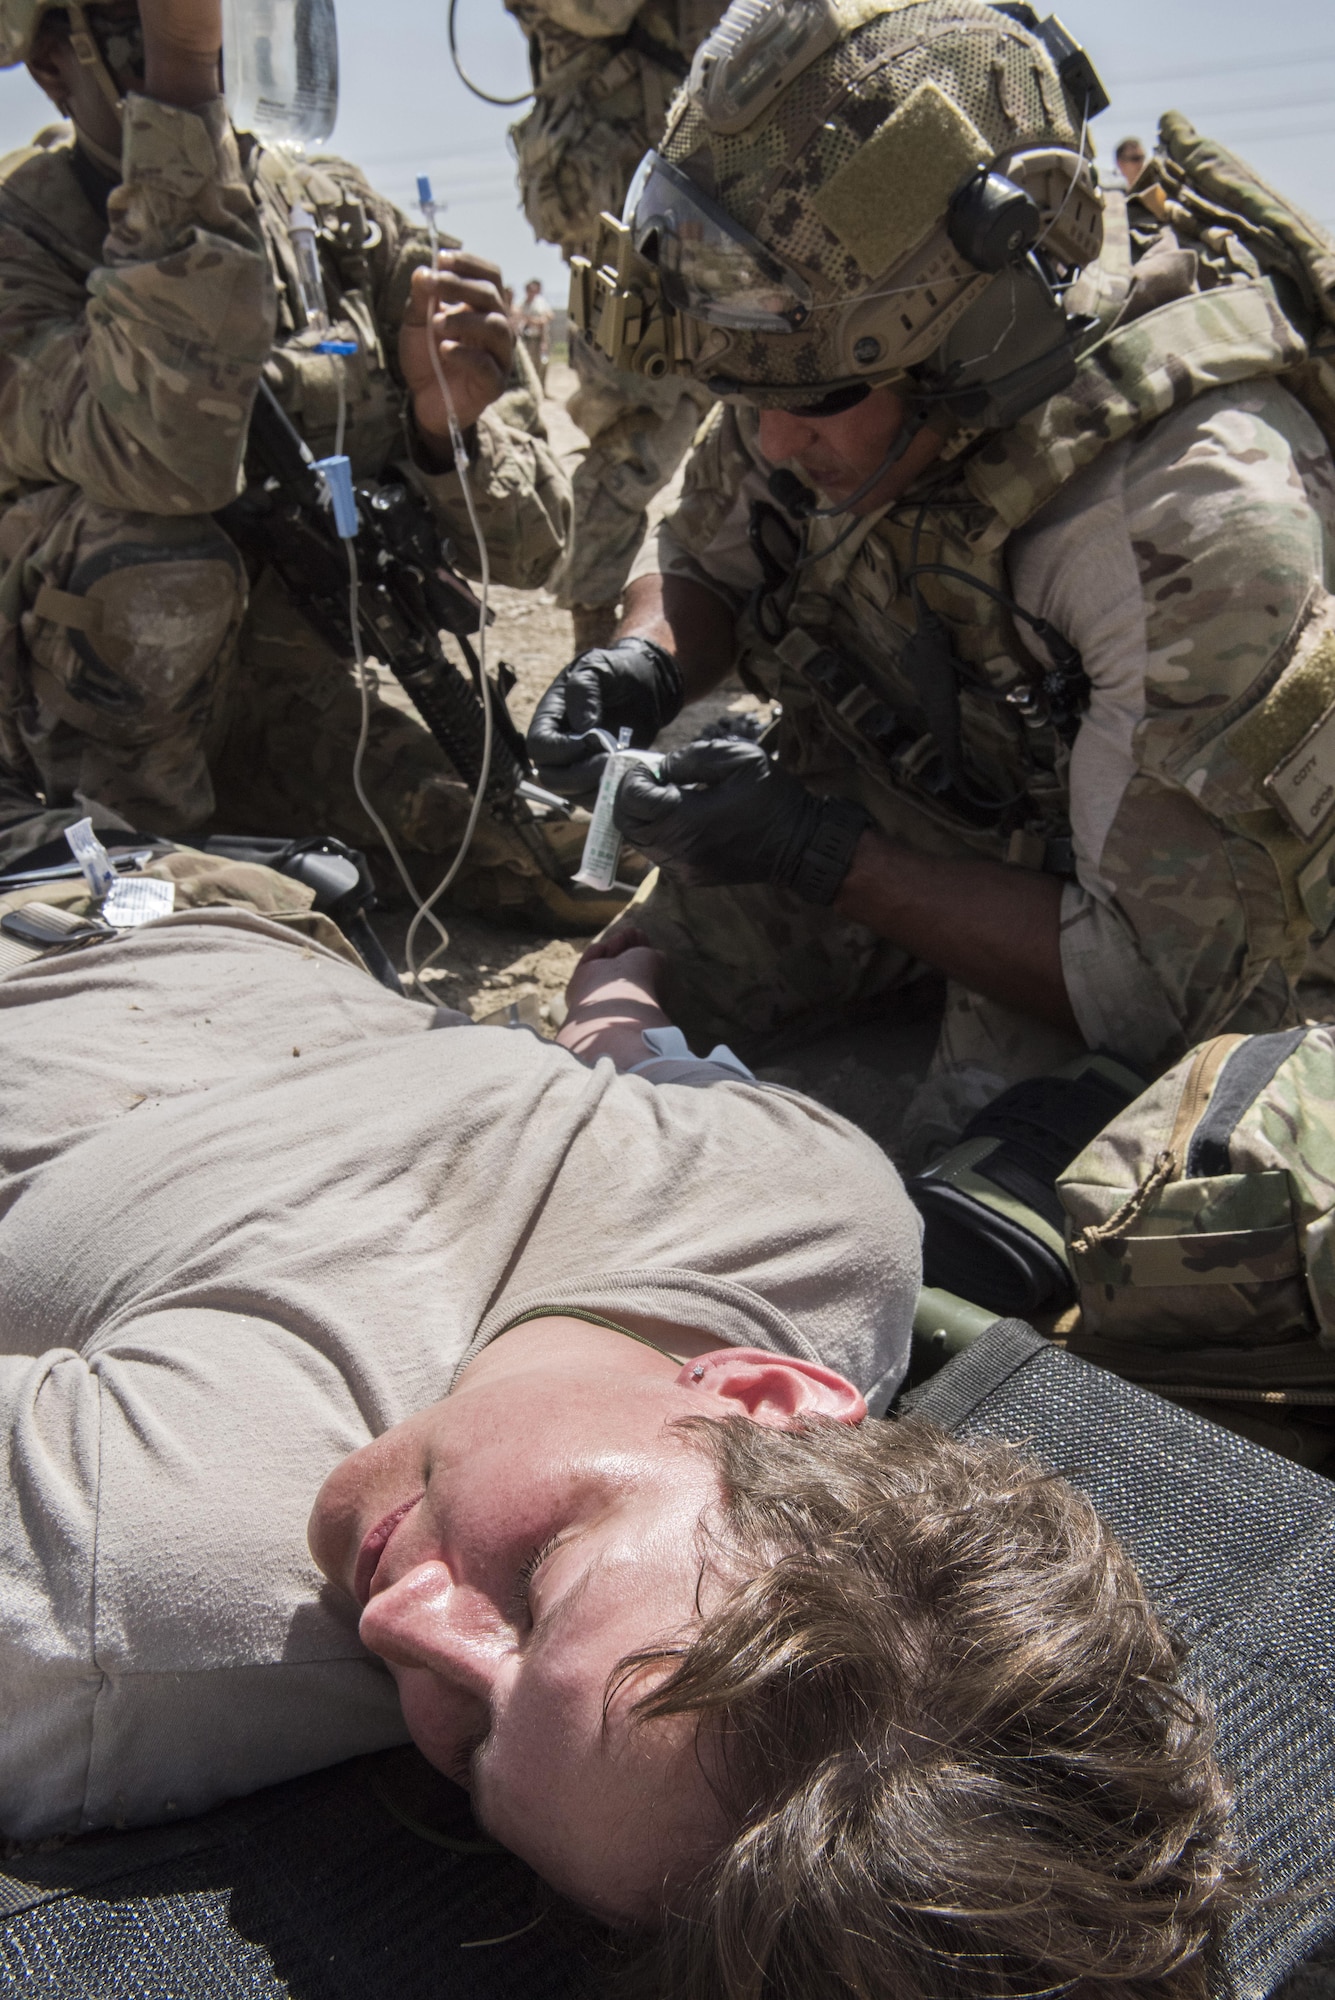 Senior Airmen Coty Polito, 83rd Expeditionary Rescue Squadron pararescue specialist, gives Master Sgt. Paige Frye, 455th Air Expeditionary Wing paralegal, an intravenous solution during a joint mass casualty and extraction exercise, June 16, 2016 at Bagram Airfield, Afghanistan. Airmen from the 455th AEW acted as wounded patients, with injuries that included broken limbs, loss of eye sight and deliria. (U.S. Air Force photo by Tech. Sgt. Tyrona Lawson)
